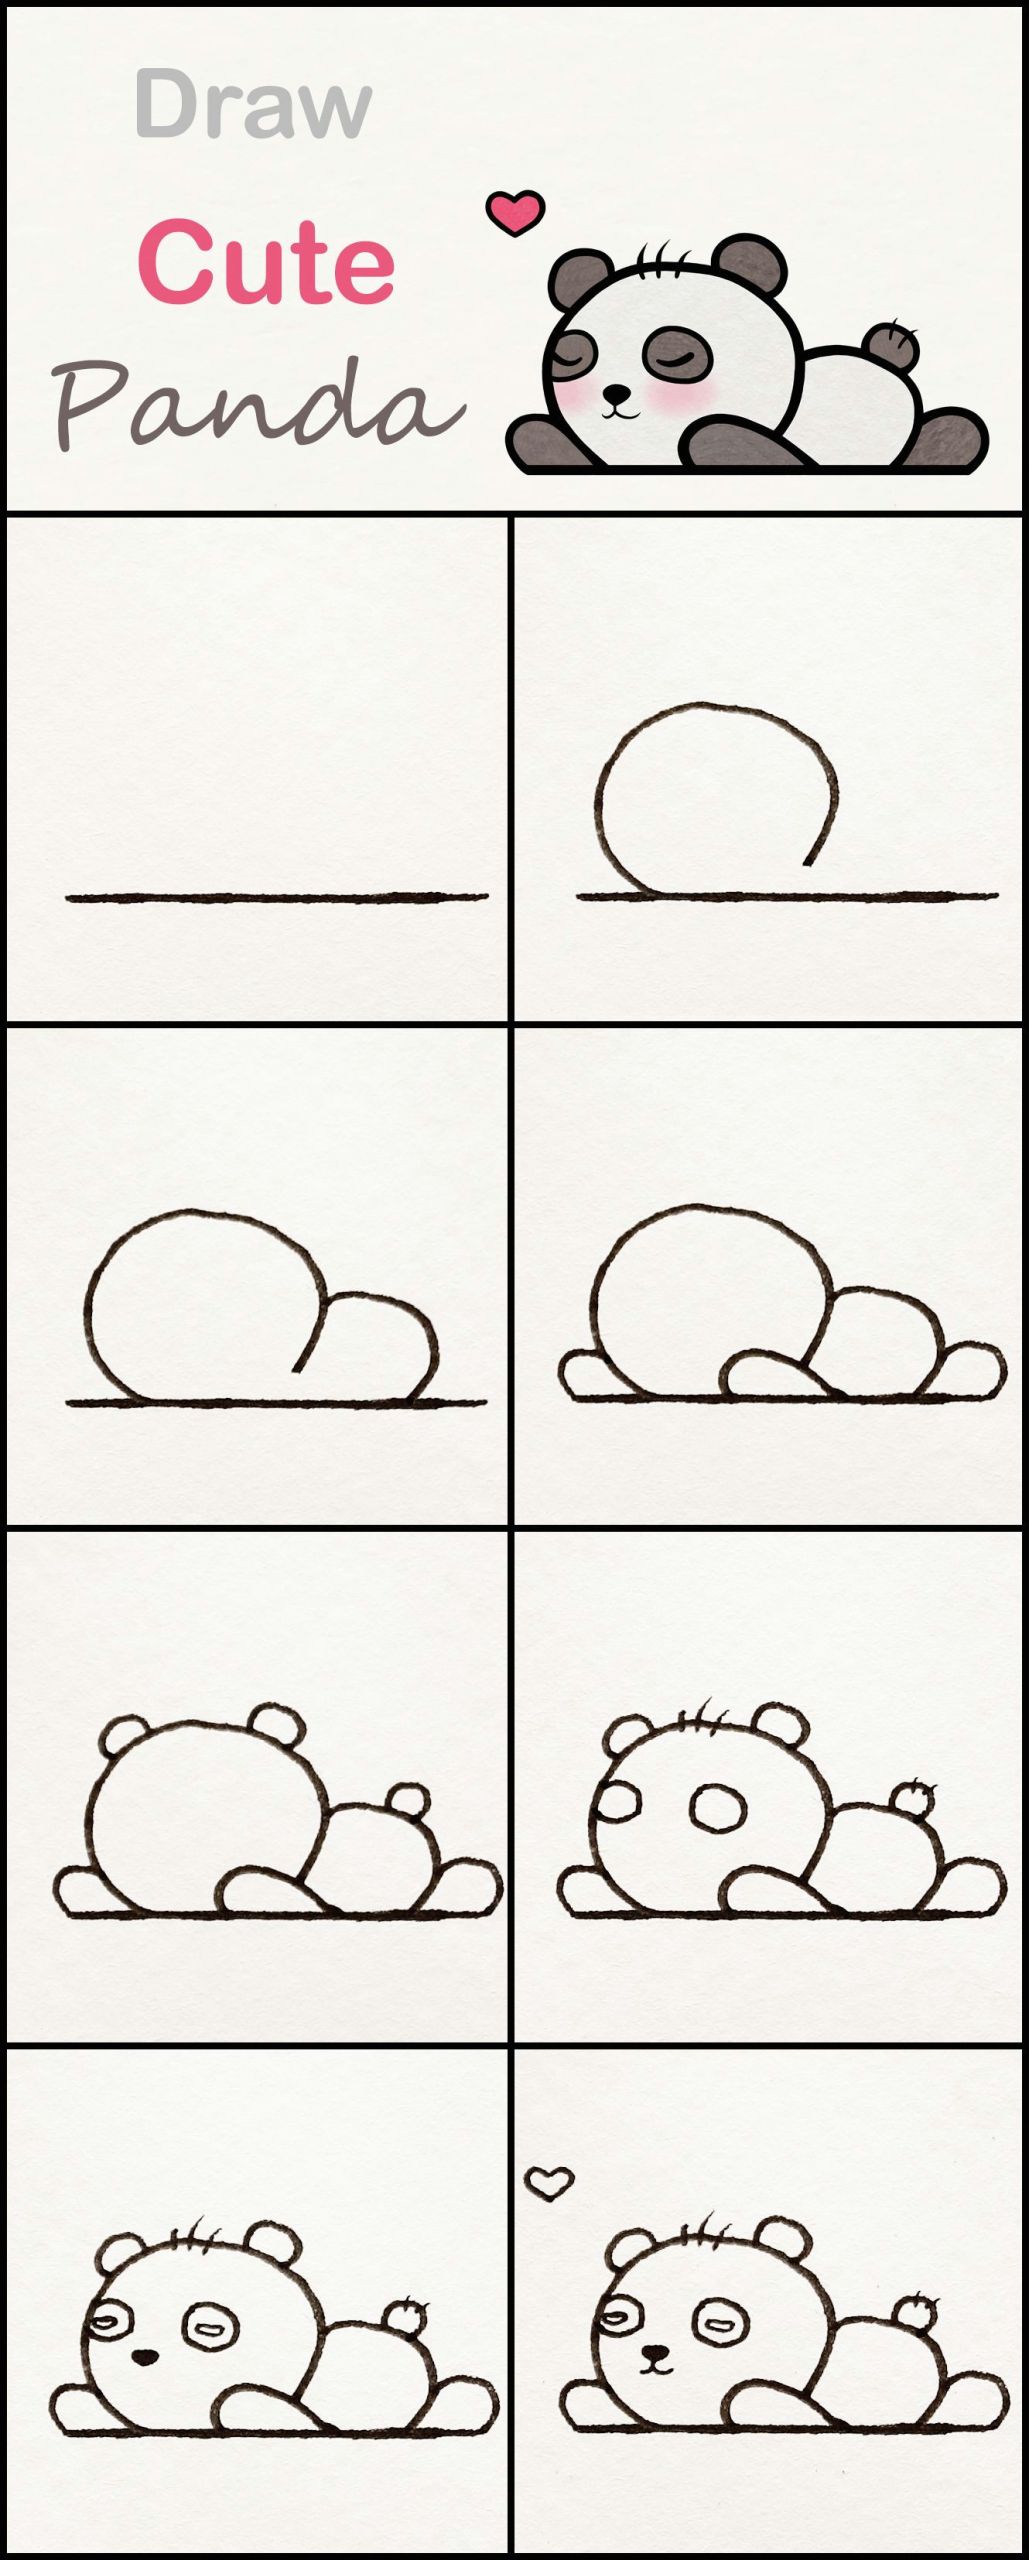 Easy to Draw Cute Things Learn How to Draw A Cute Baby Panda Step by Step A Very